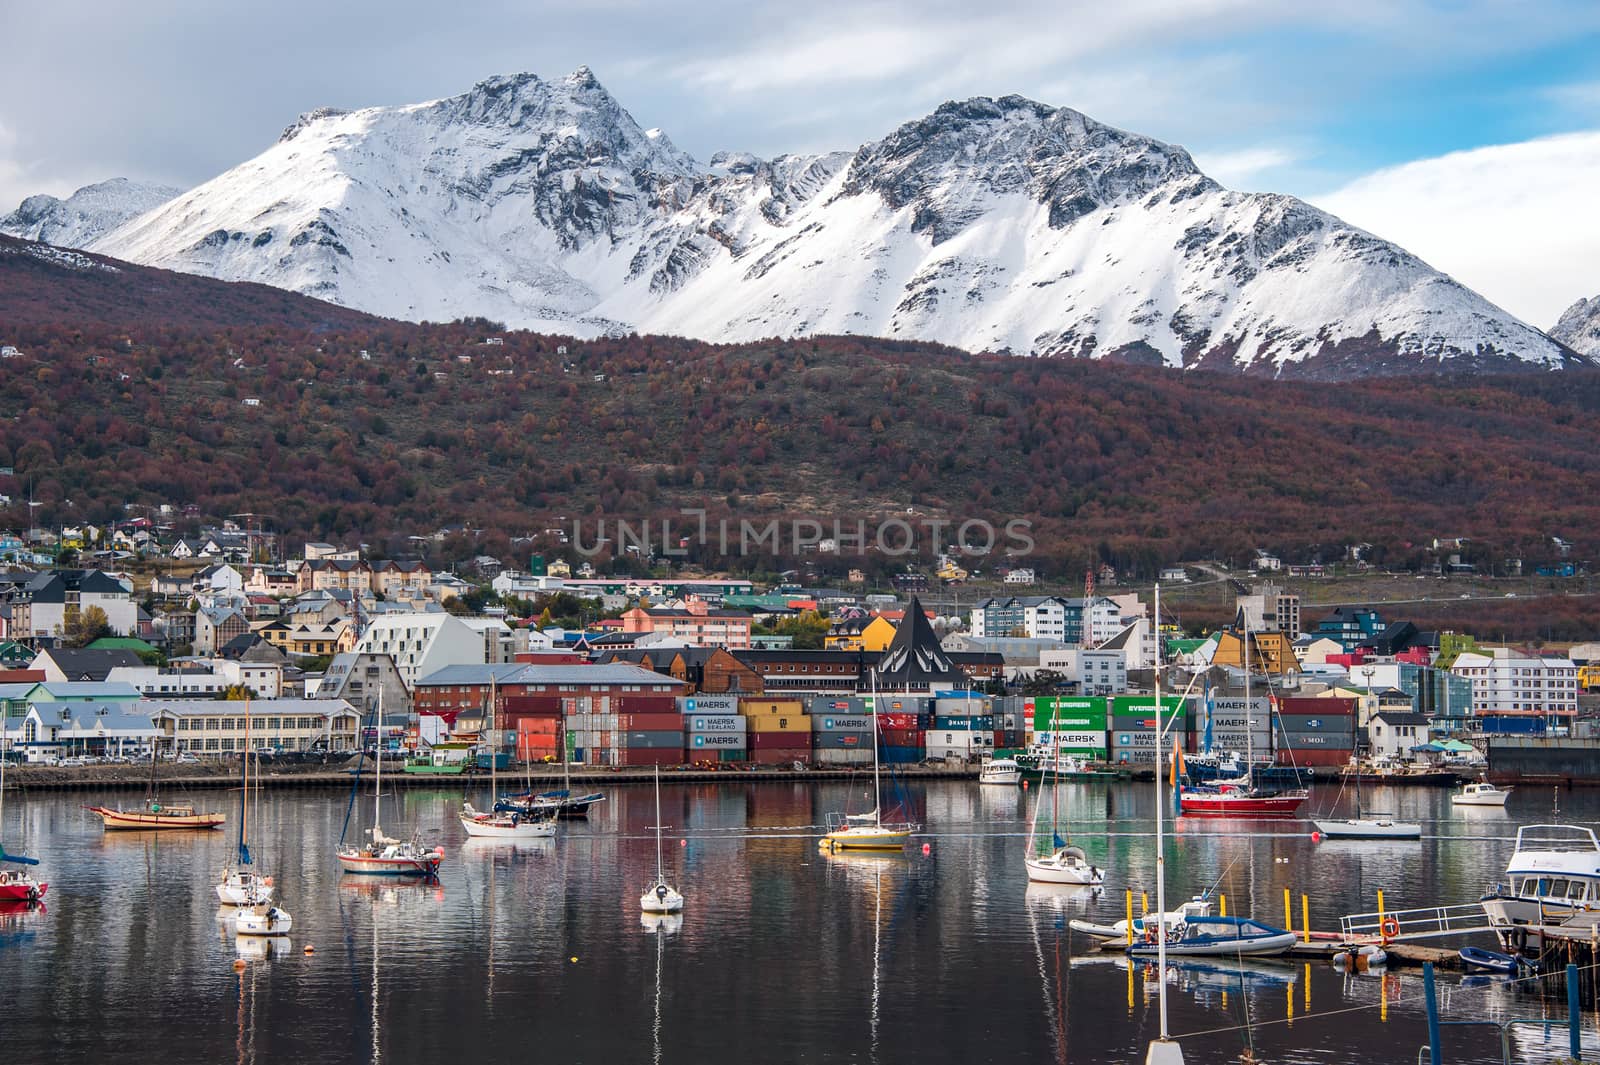 Early morning in Ushuaia, Patagonia, Argentina by xura